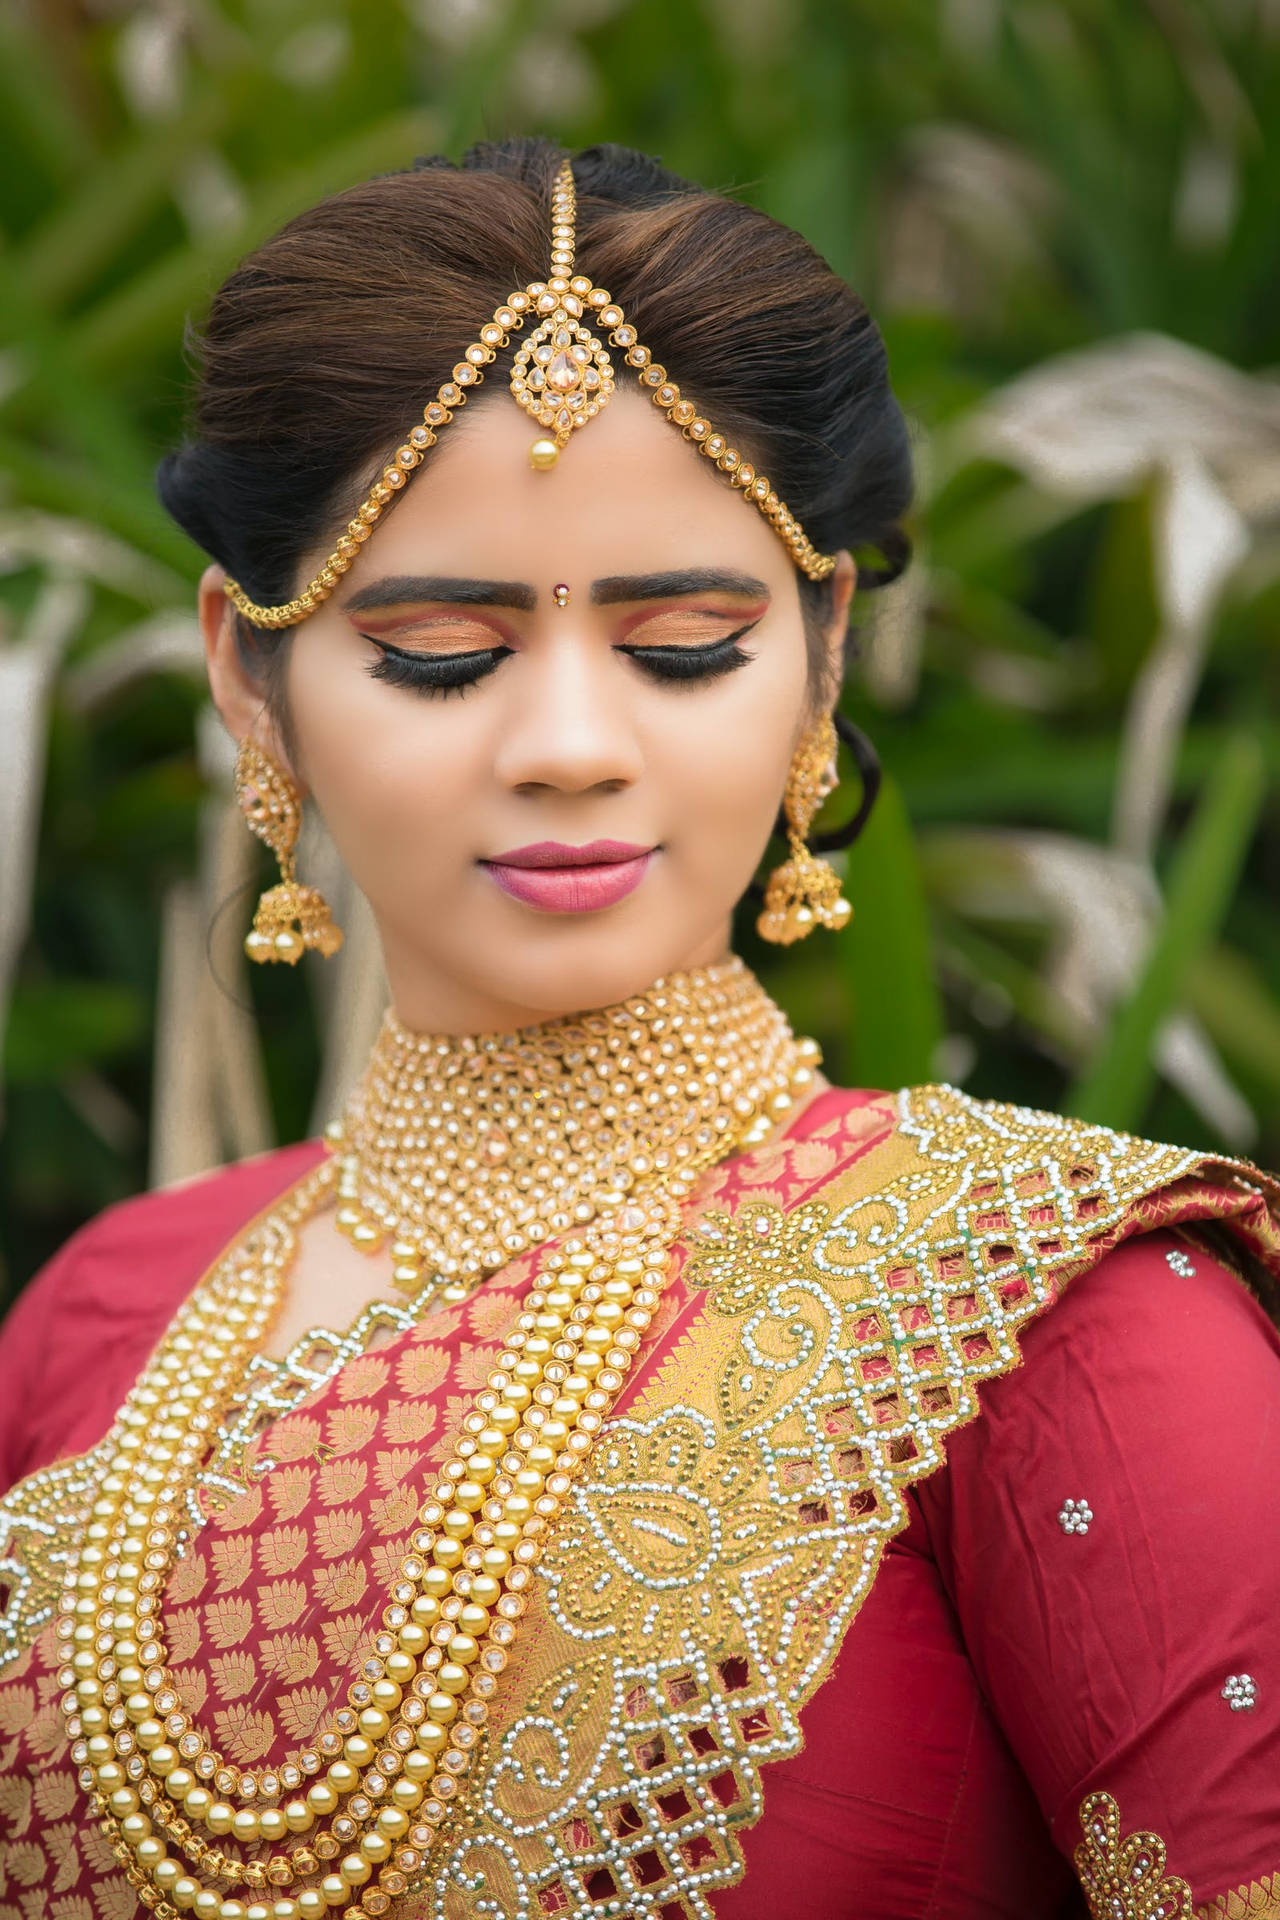 Radiant Elegance: An Indian Bride At Her Traditional Wedding Background